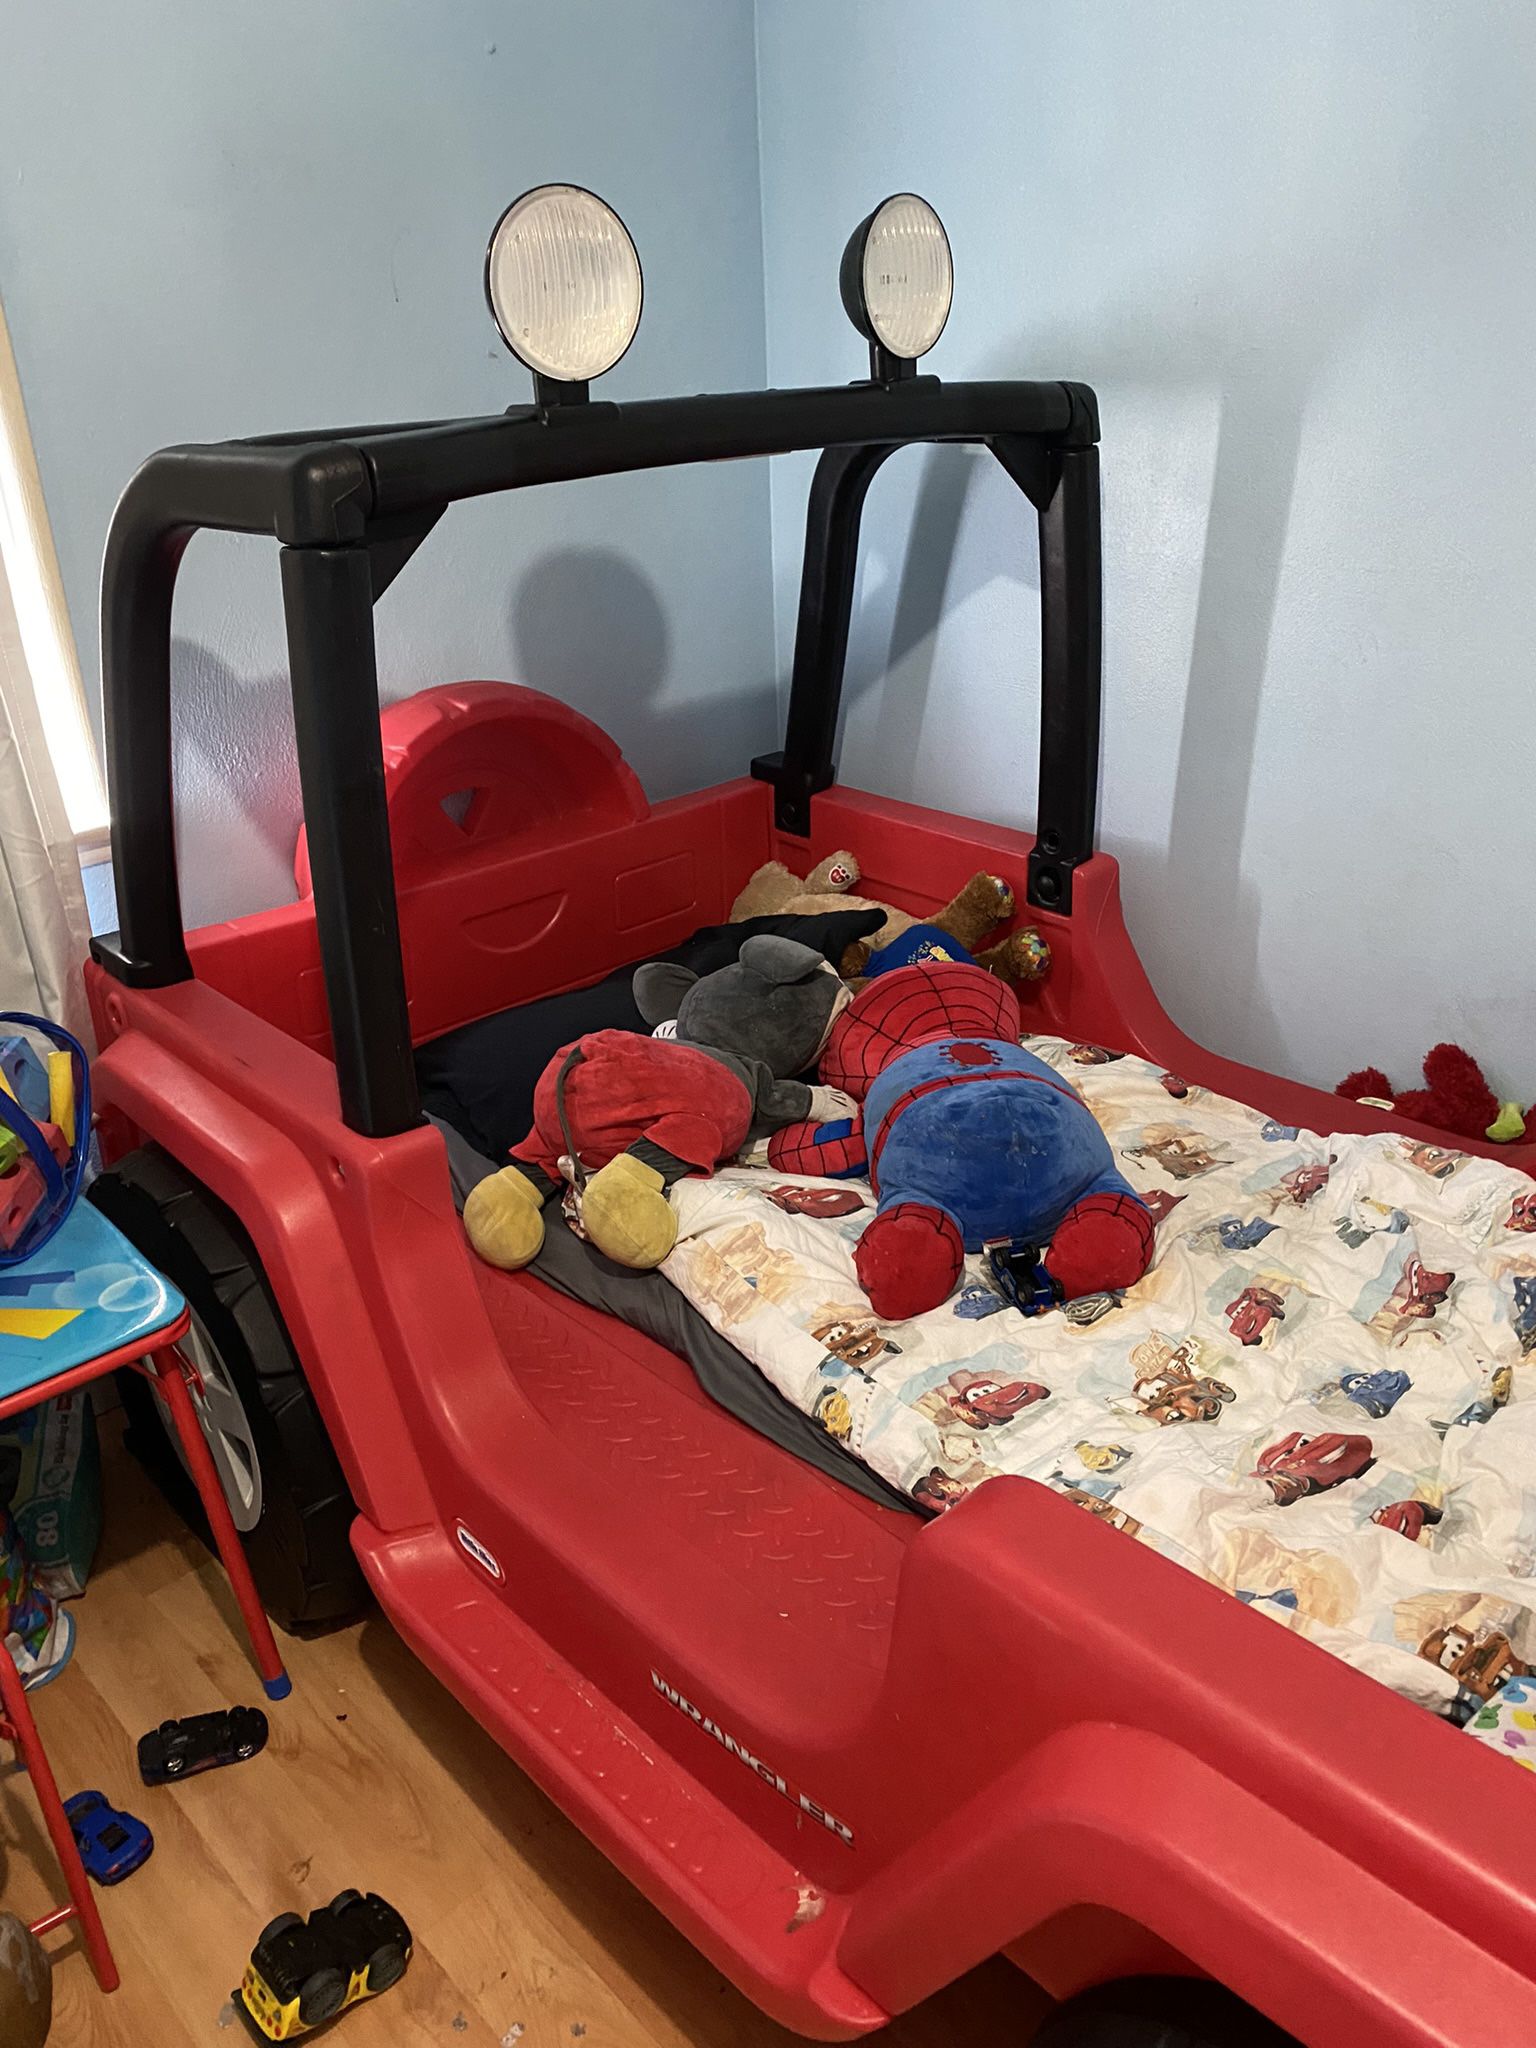 Jeep Wrangler Toddler/Twin BED for Sale in Montclair, CA - OfferUp